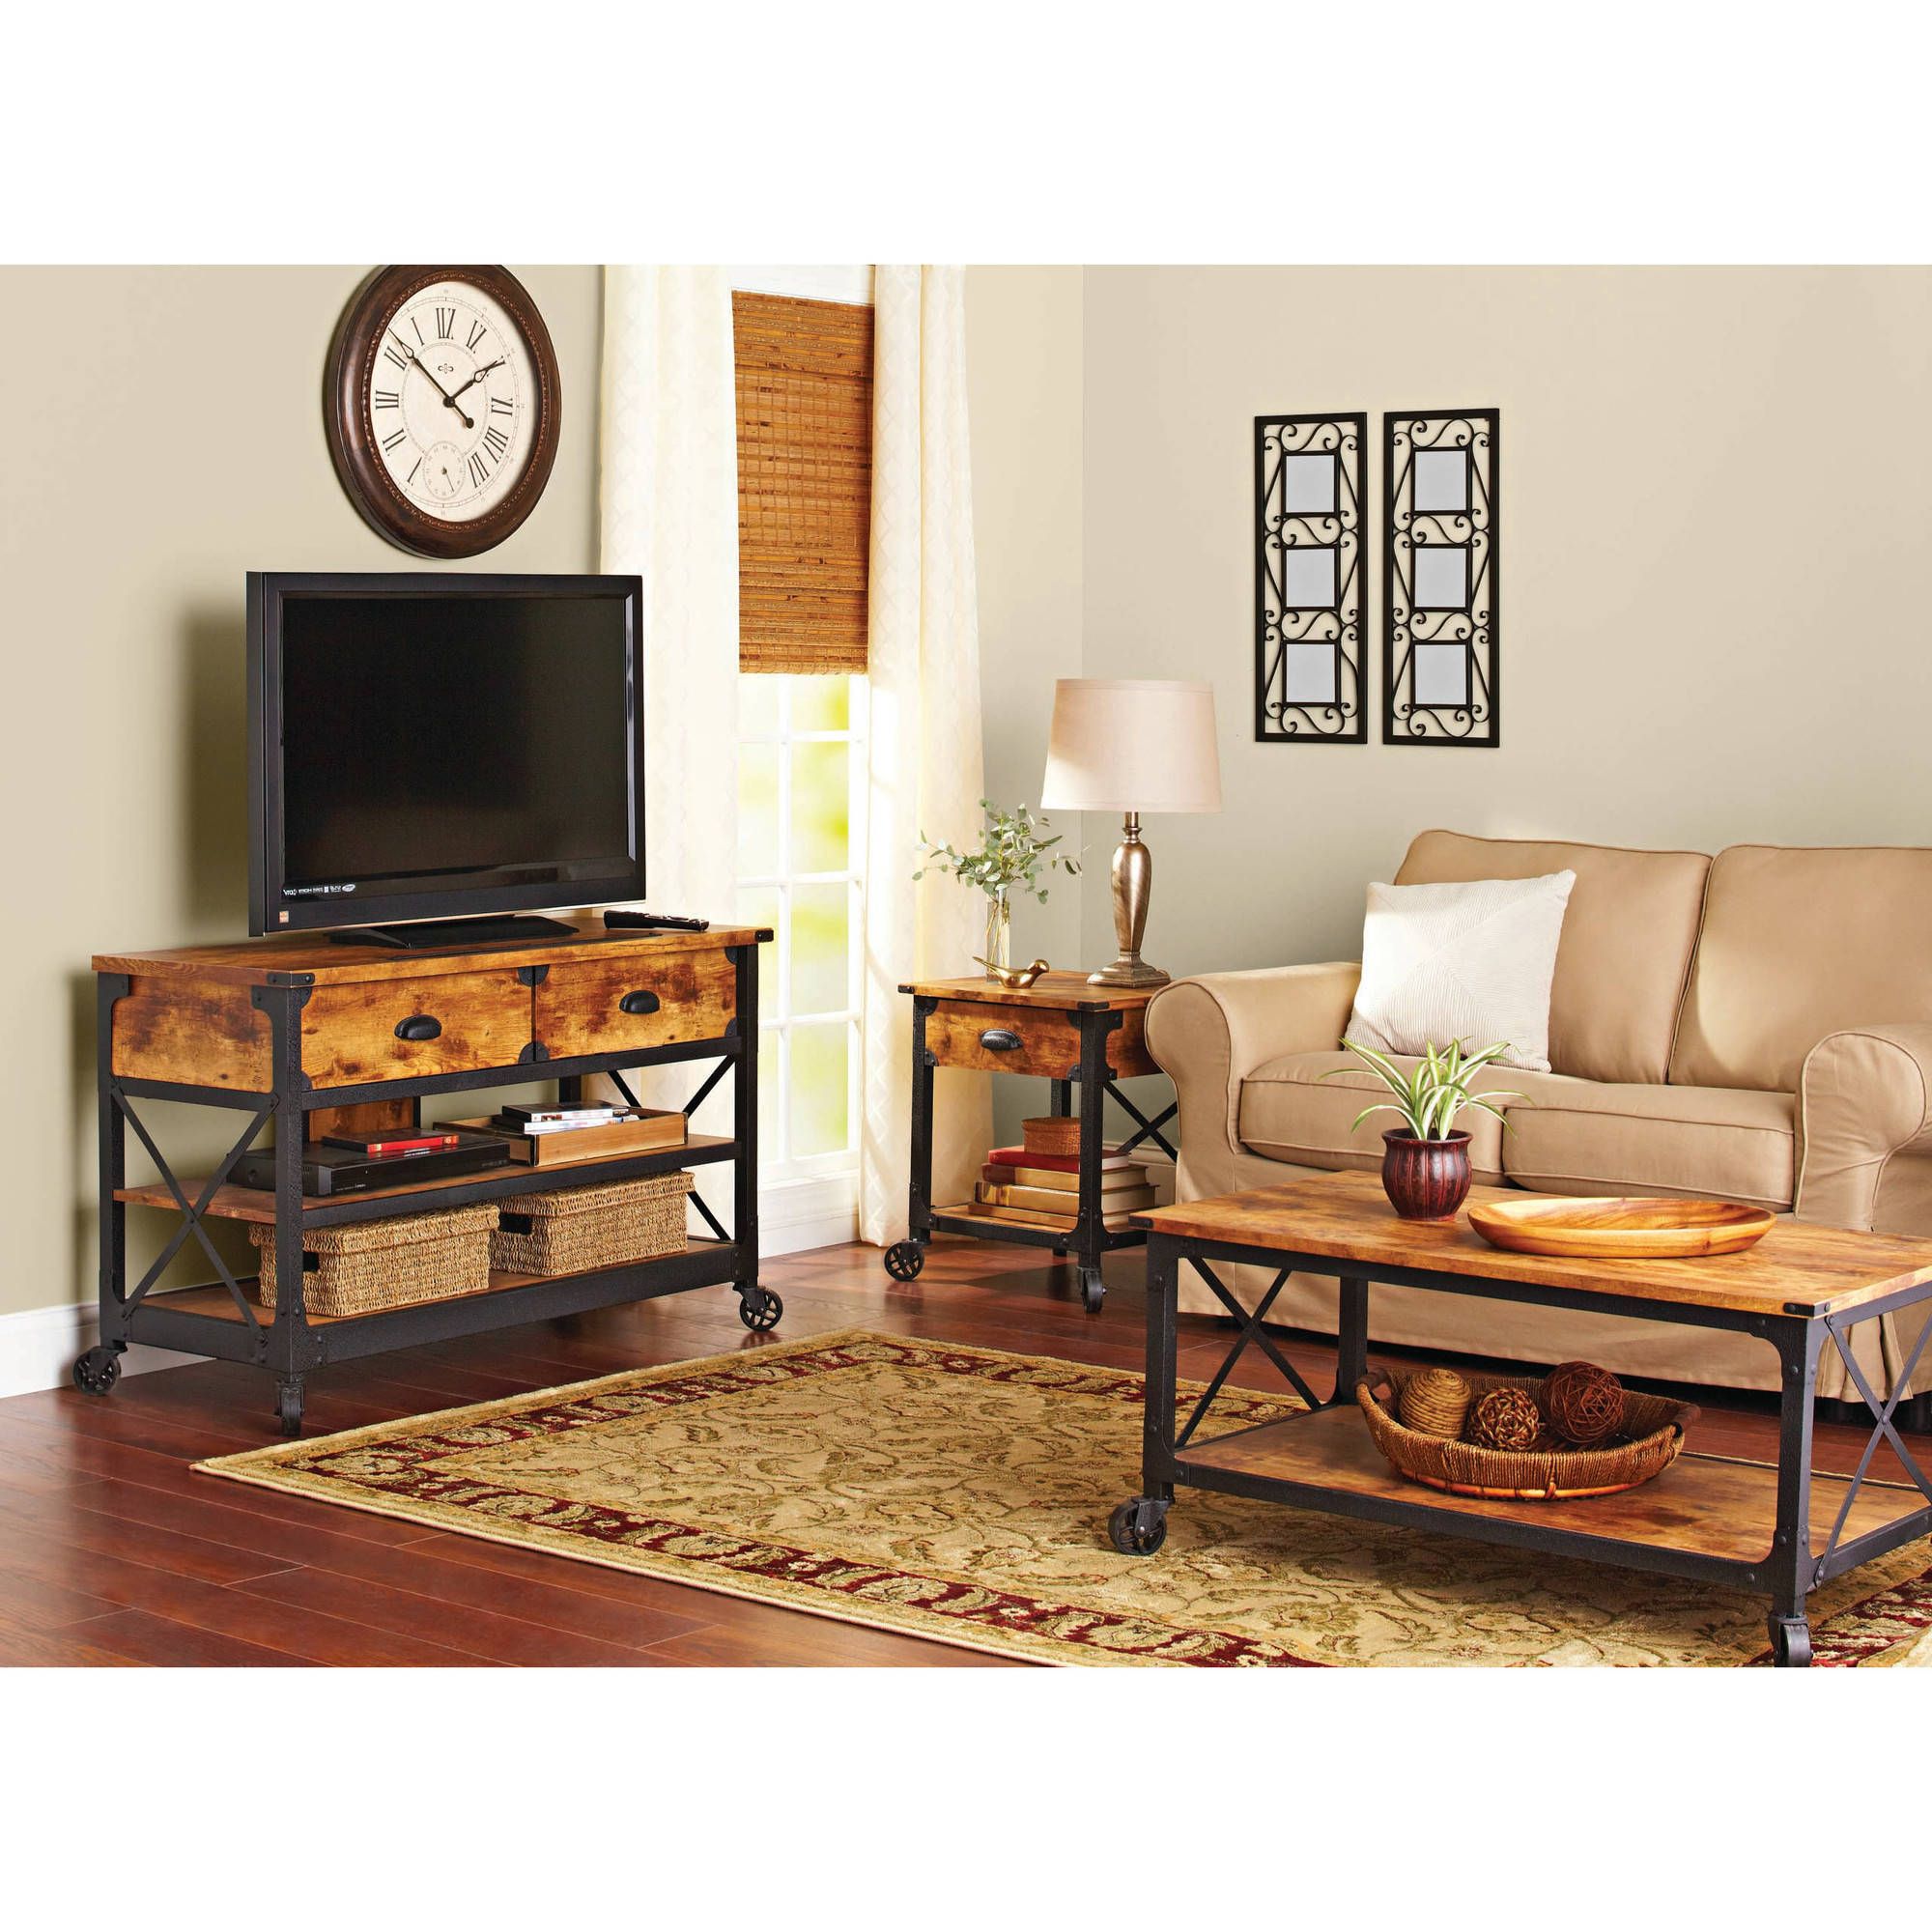 Better Homes & Gardens Rustic Country Tv Stand For Tvs Up To 52 For Current Coffee Table And Tv Unit Sets (View 5 of 20)